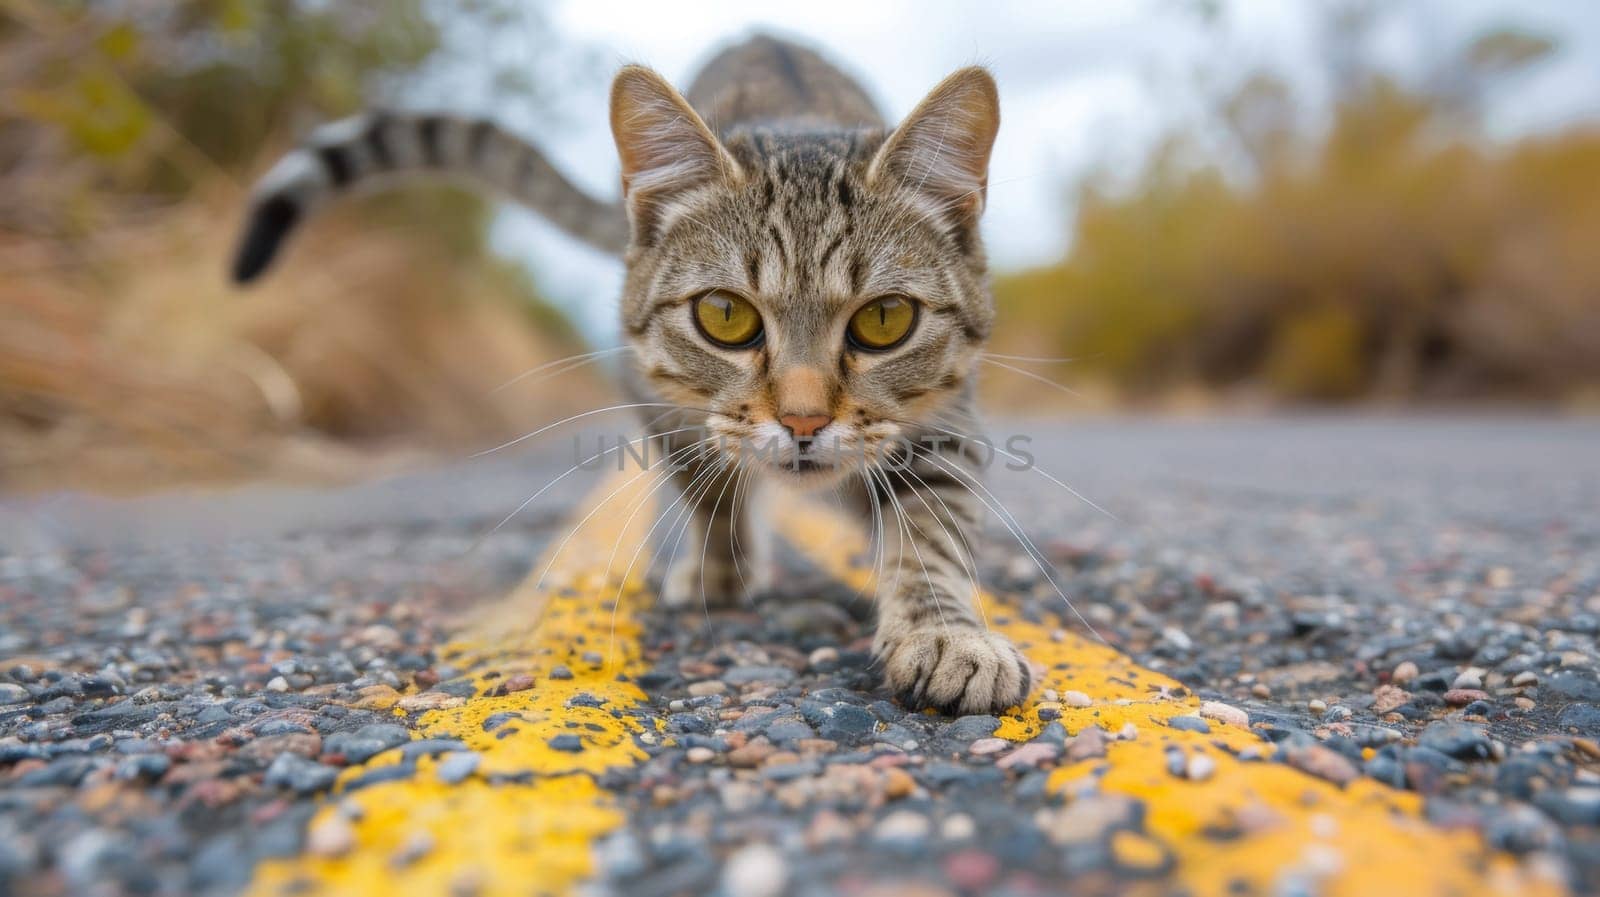 A cat walking on a yellow line in the middle of road